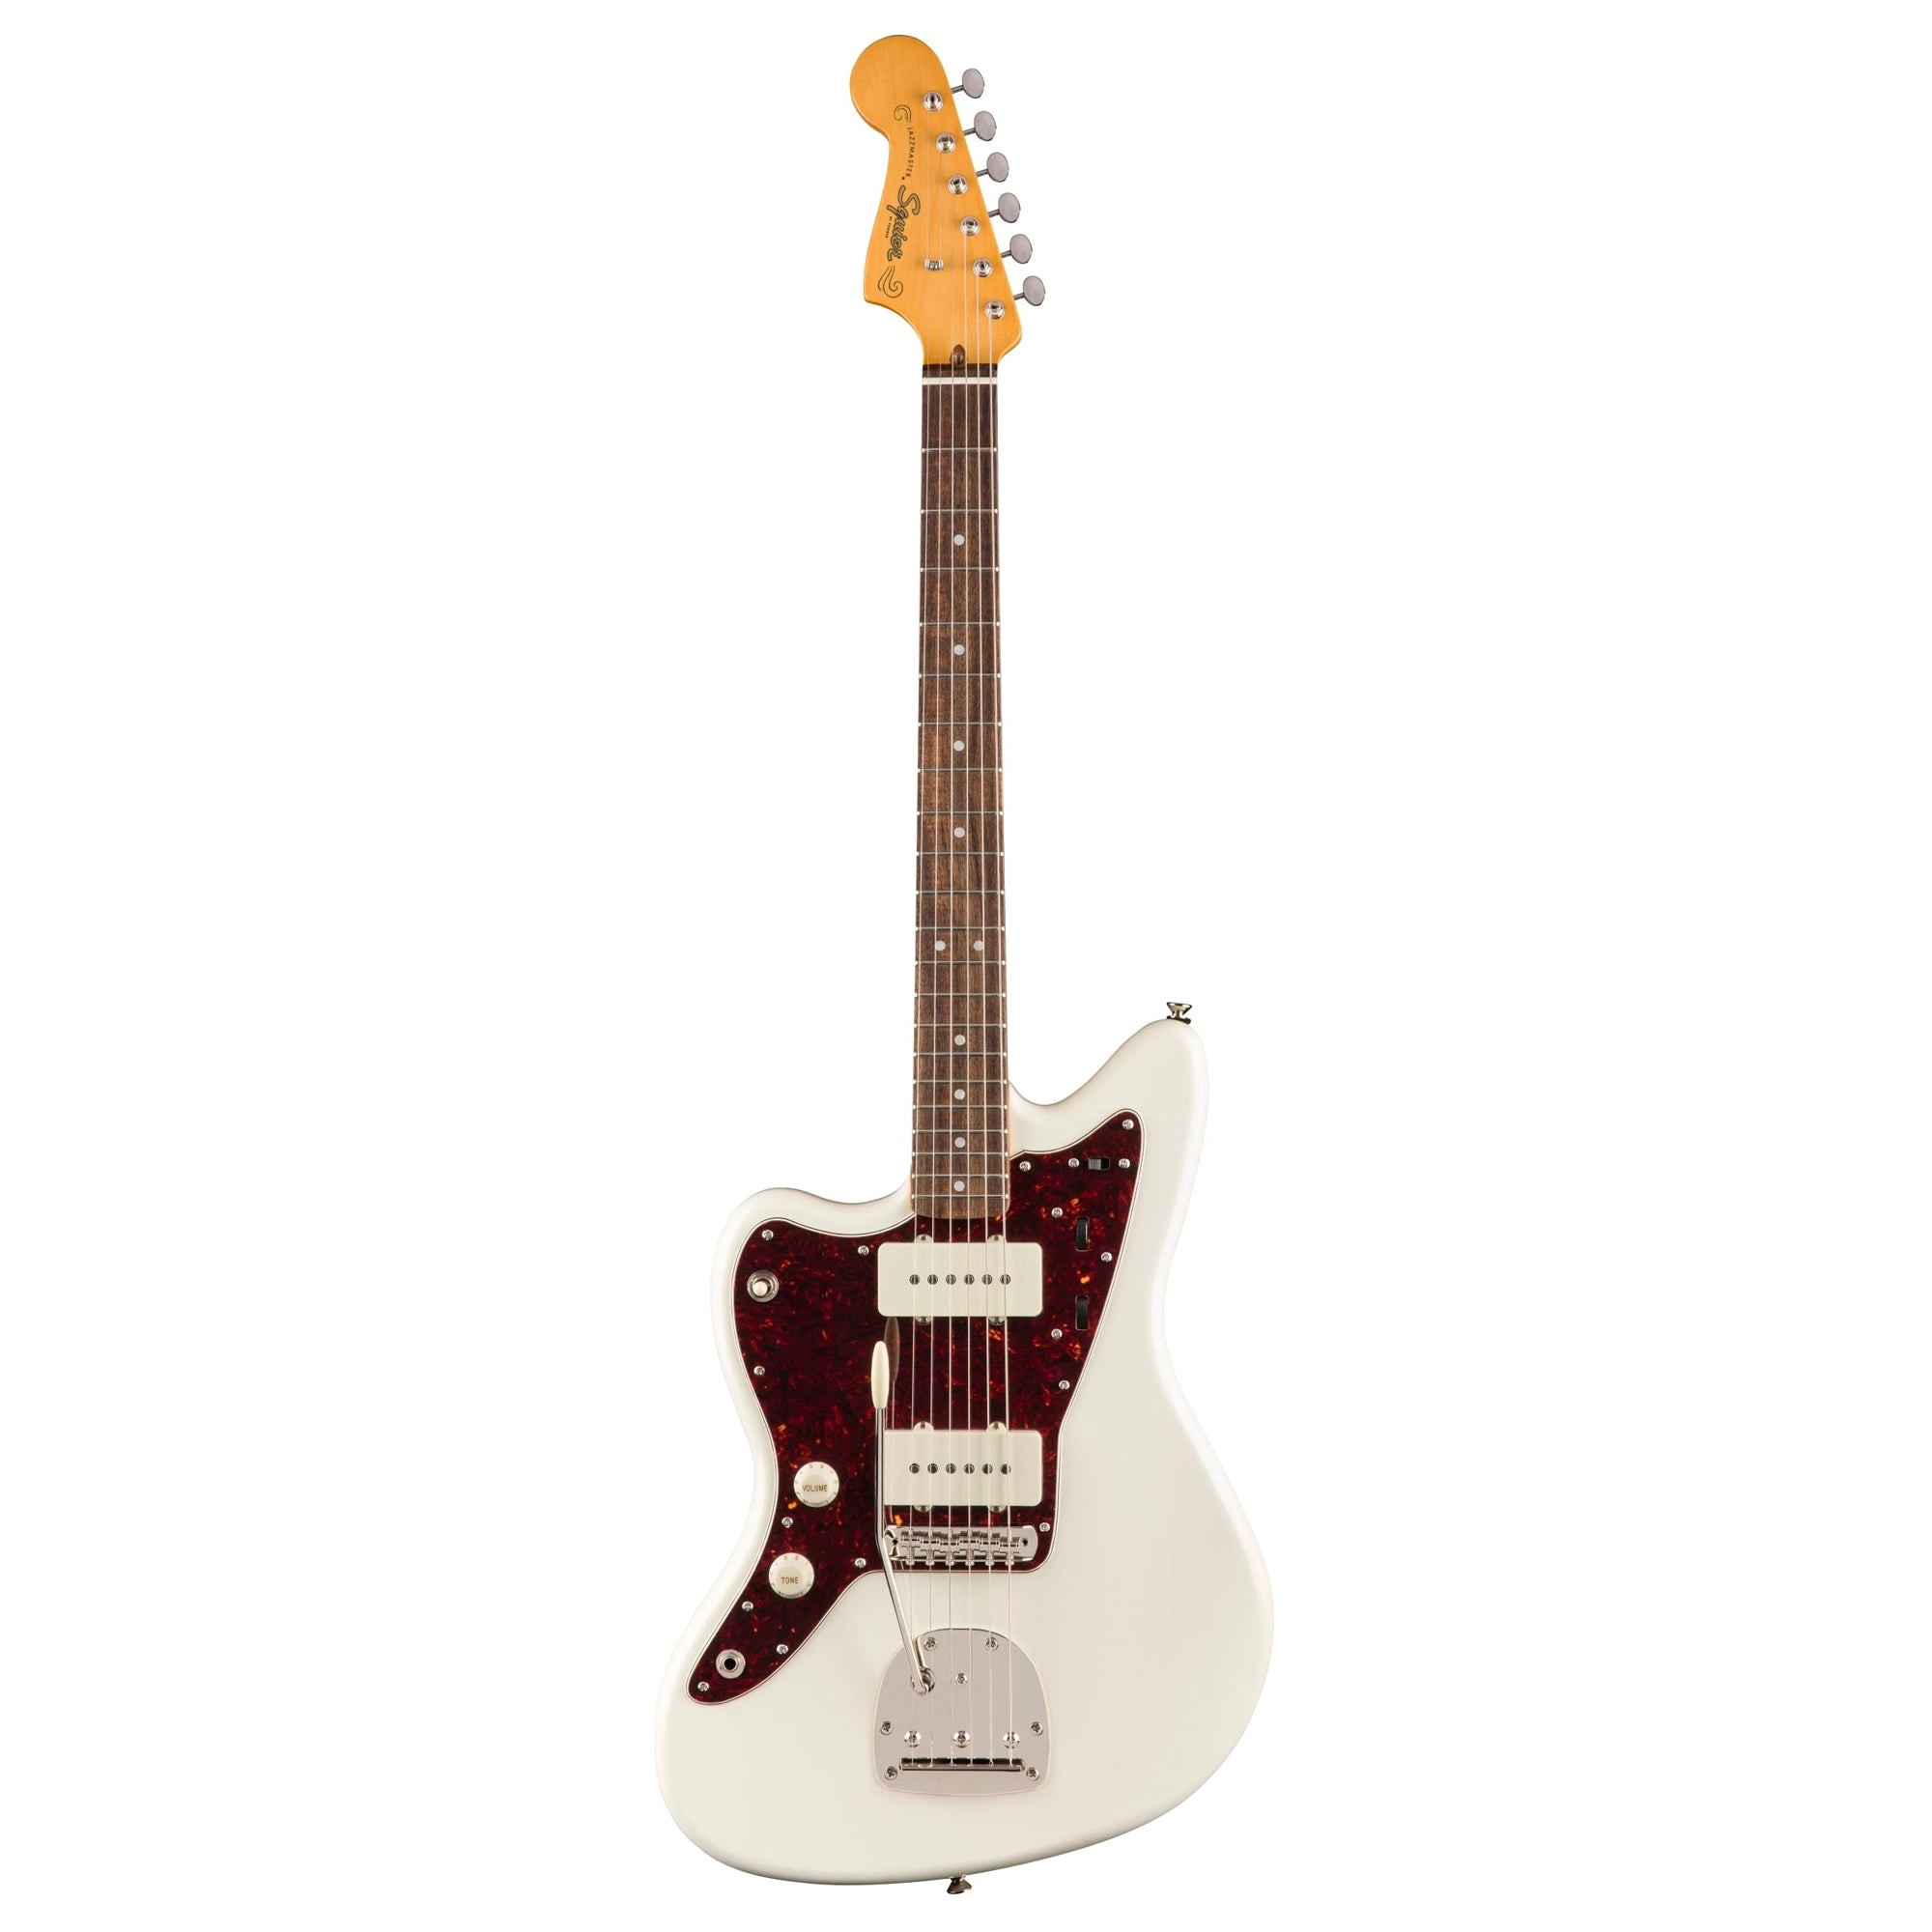 Squier Classic Vibe 60's Jazzmaster Left Handed Electric Guitar - Olimpic White